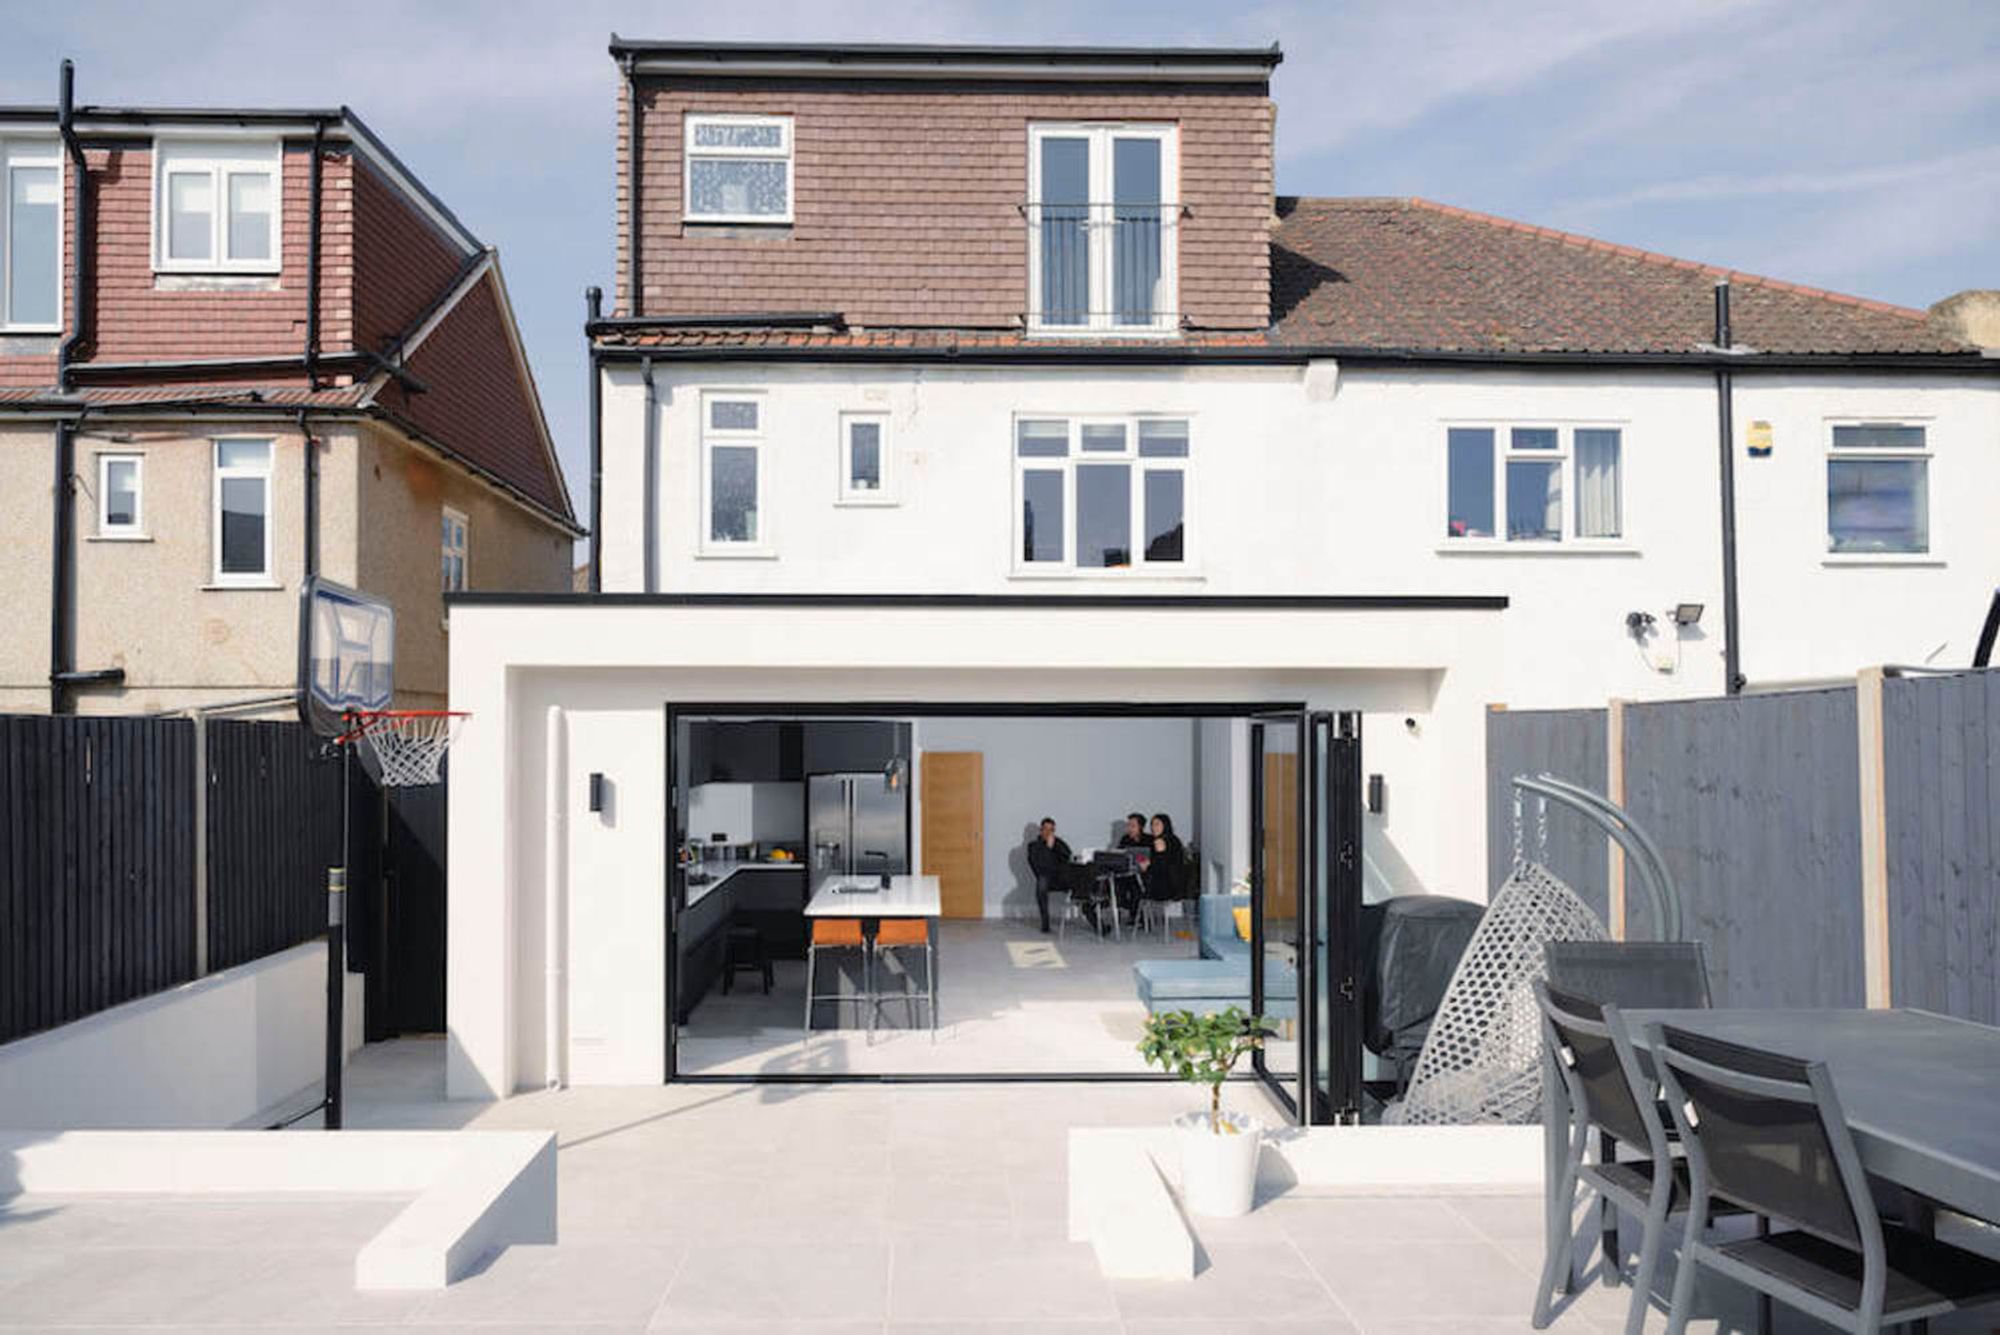 A completed single-storey extension on a semi-detached Lewisham home